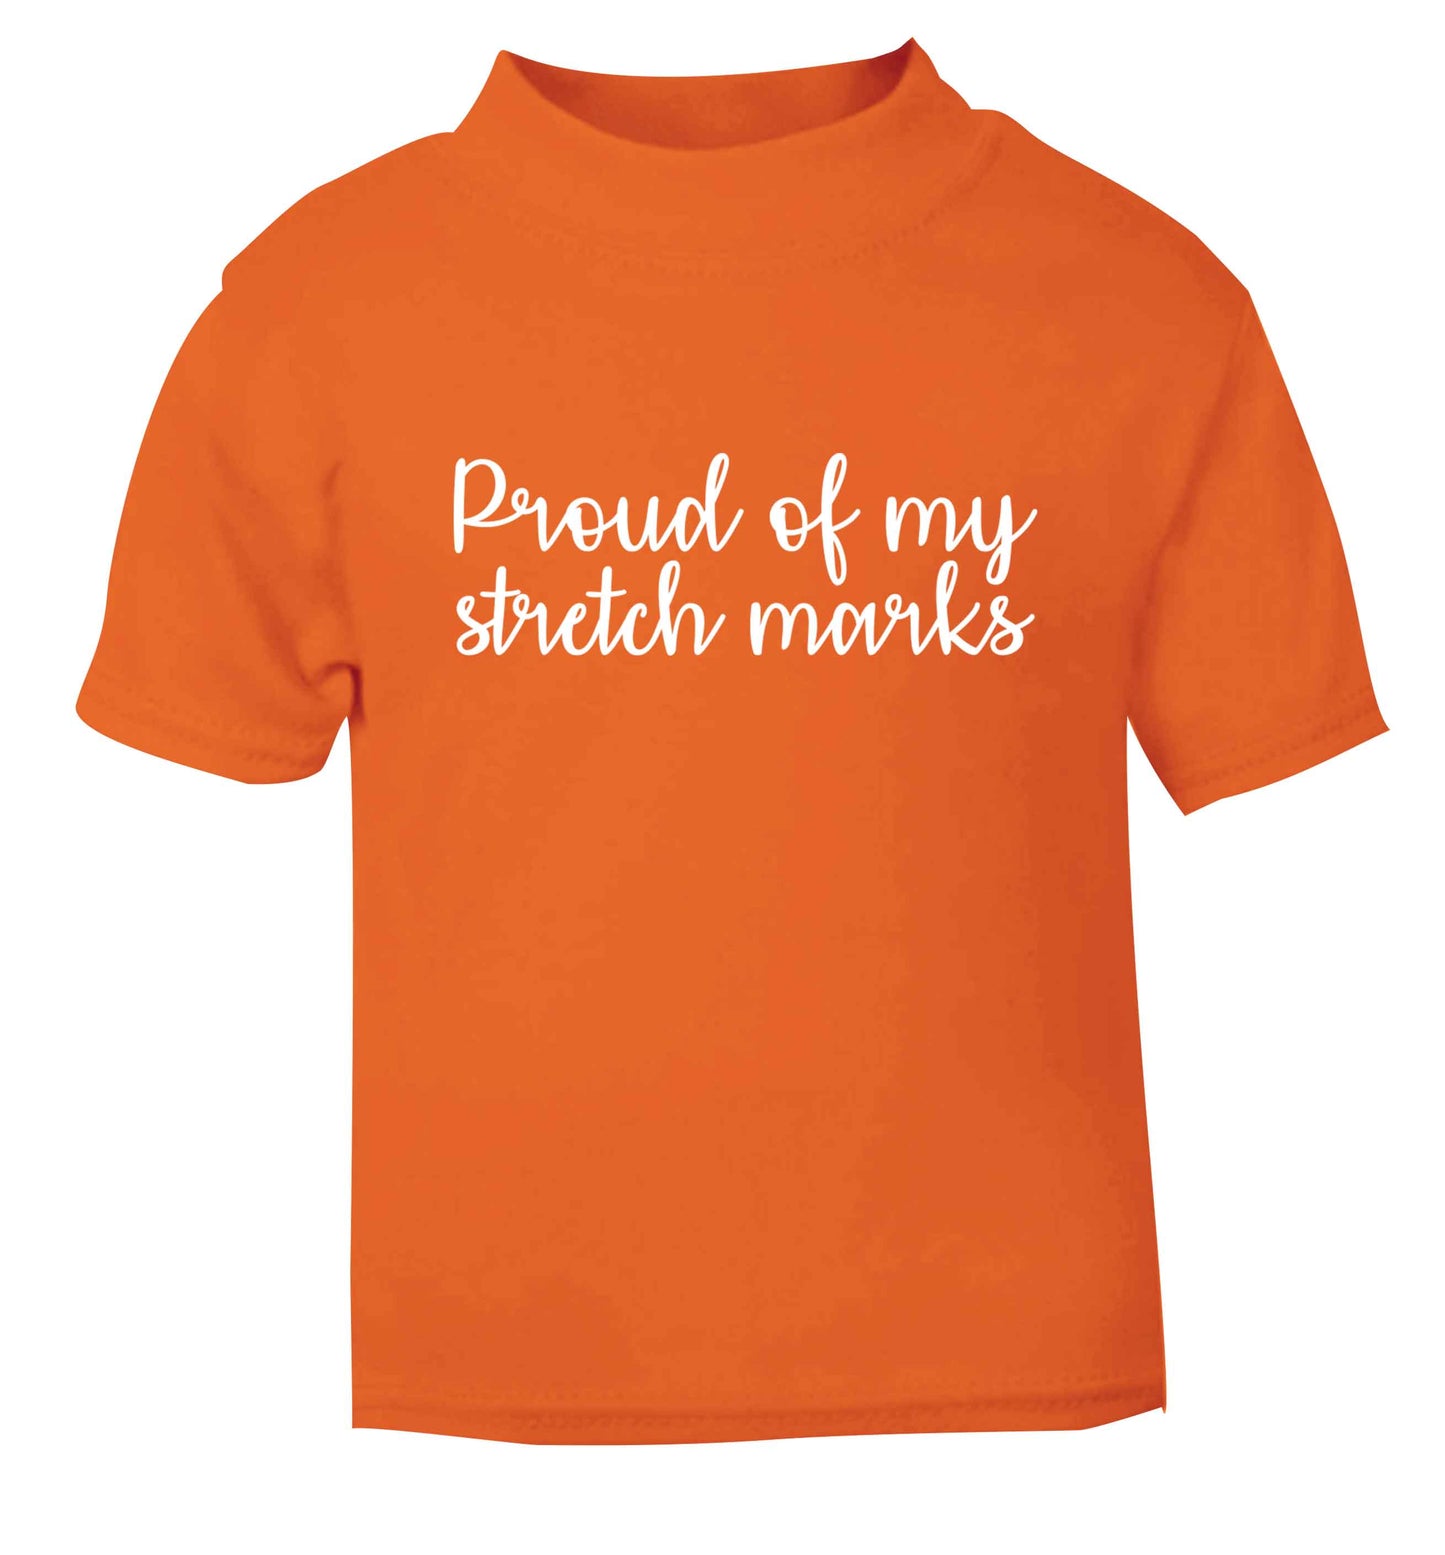 Proud of my stretch marks orange baby toddler Tshirt 2 Years